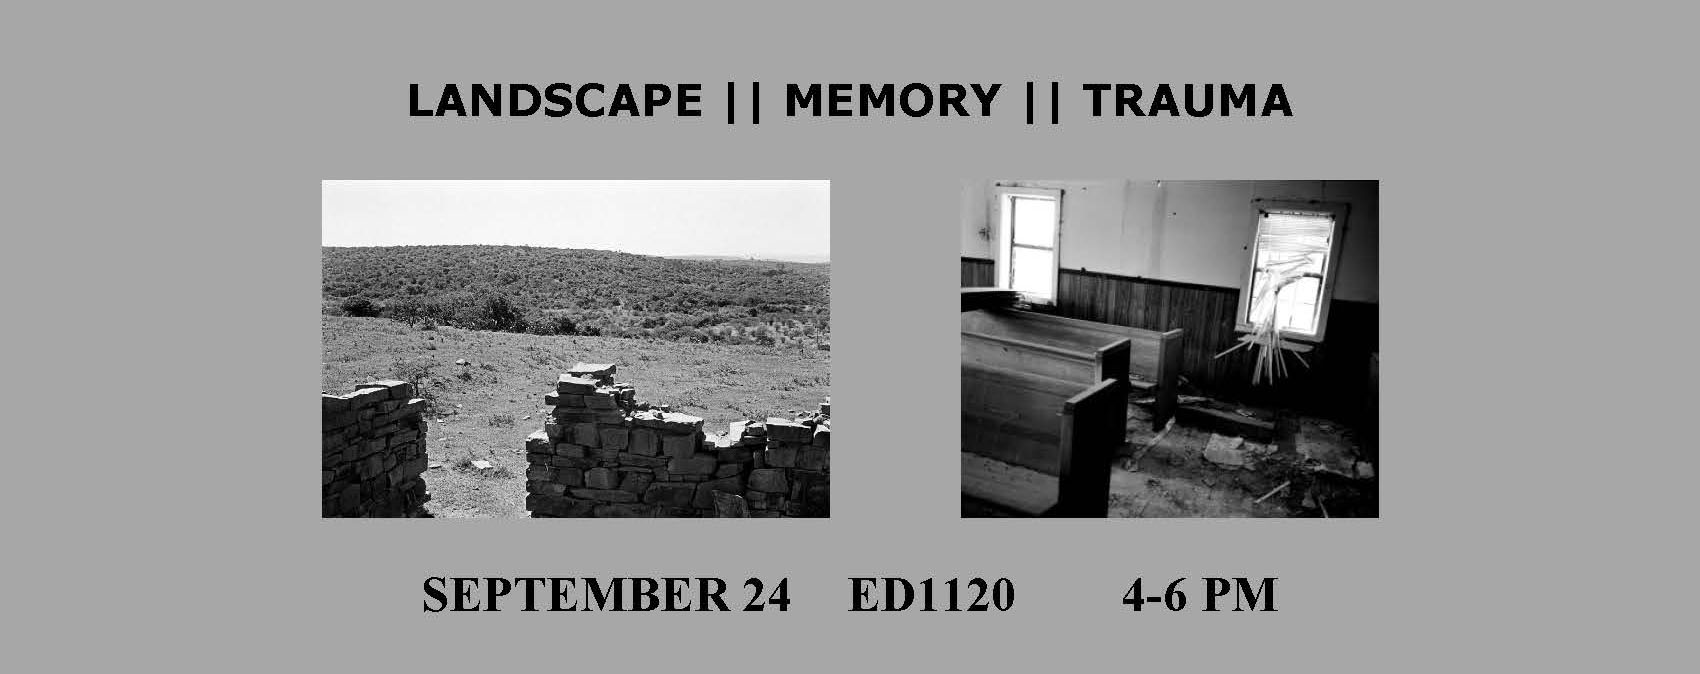 Part of the poster for "Landscape | Memory | Trauma." Two black-and-white photos are shown side by side. The one on the left is of a short and crumbling stone wall in the foreground with a field behind it. The image on the right shows the inside of a building with pews inside, and the blinds over a window have been destroyed, leaving a mess on the ground.   Text below these images reads, "September 24. ED1120. 4-6 PM."